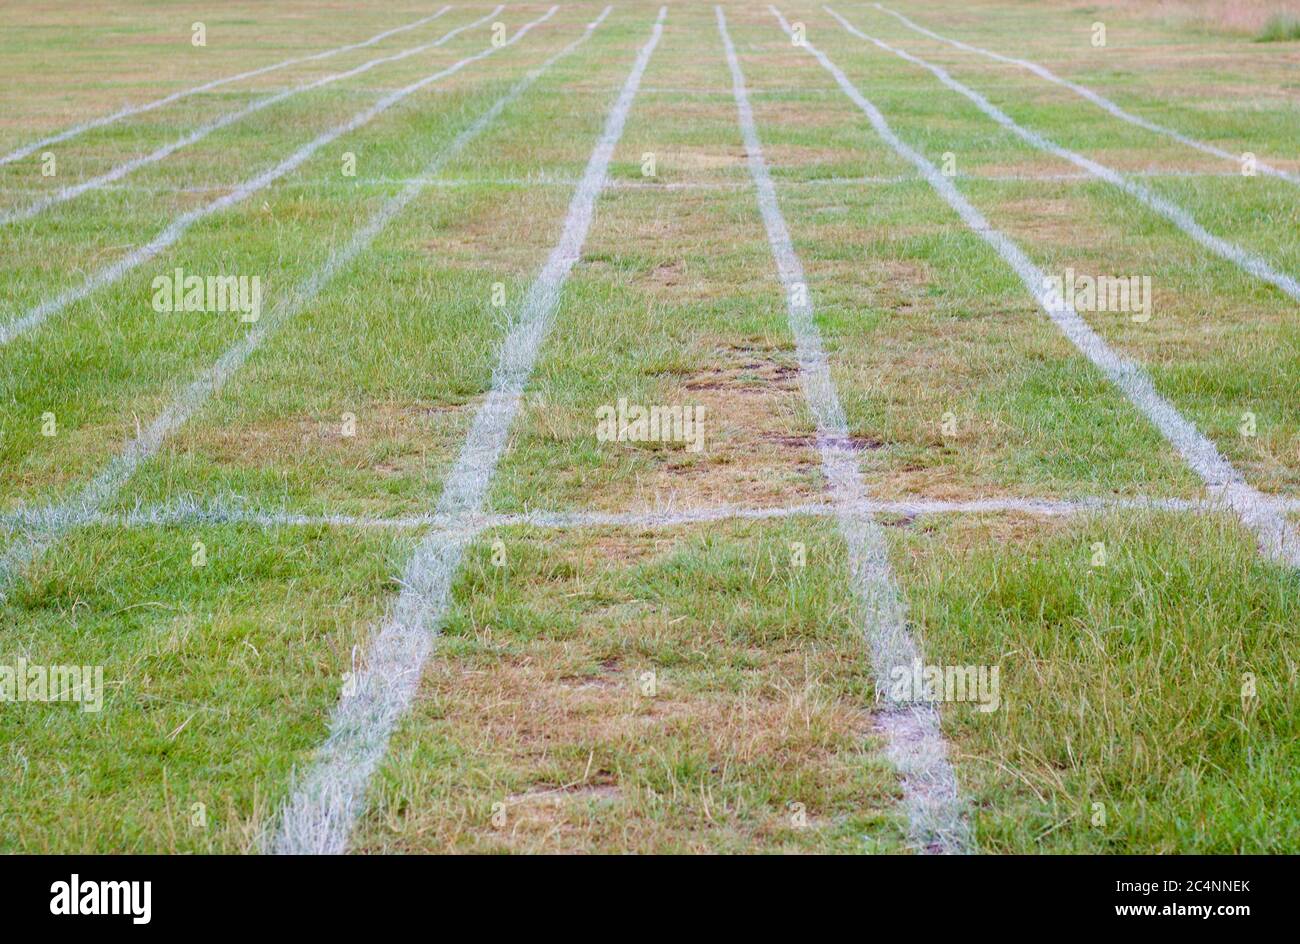 Field marked out with parallel running lanes for athletics events Stock Photo